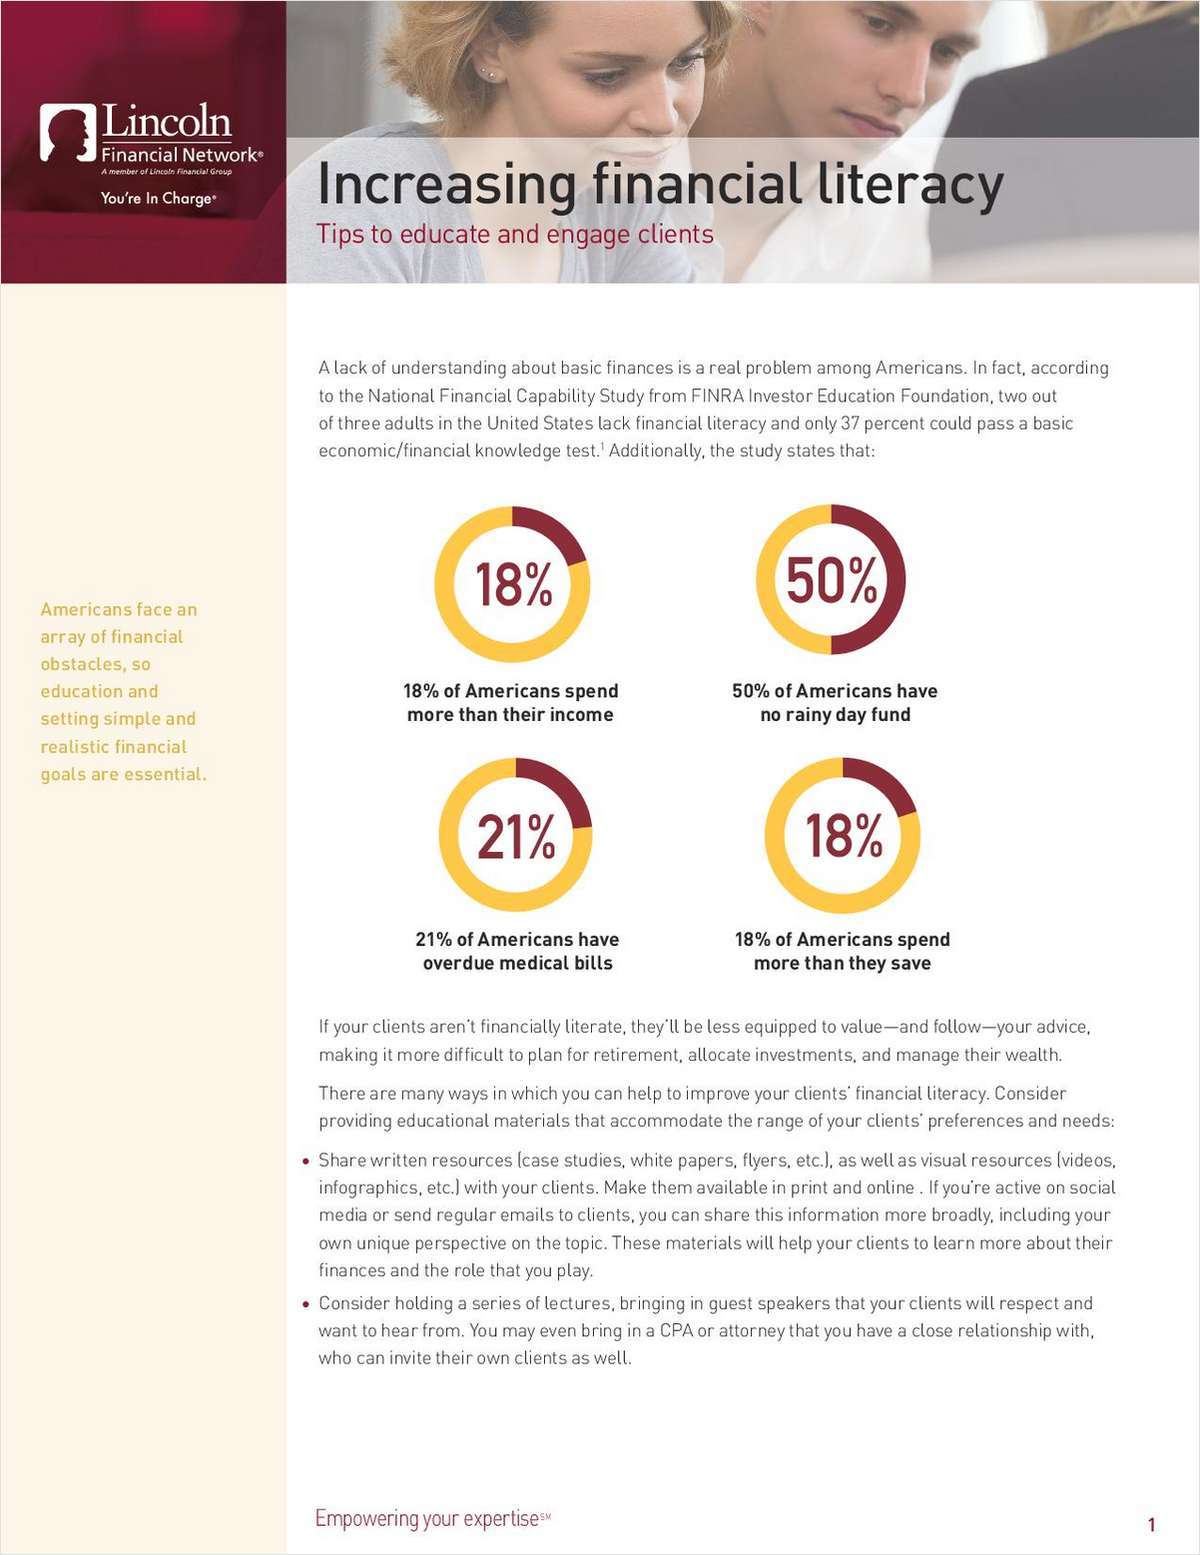 Increasing Financial Literacy: Tips to Educate and Engage Clients